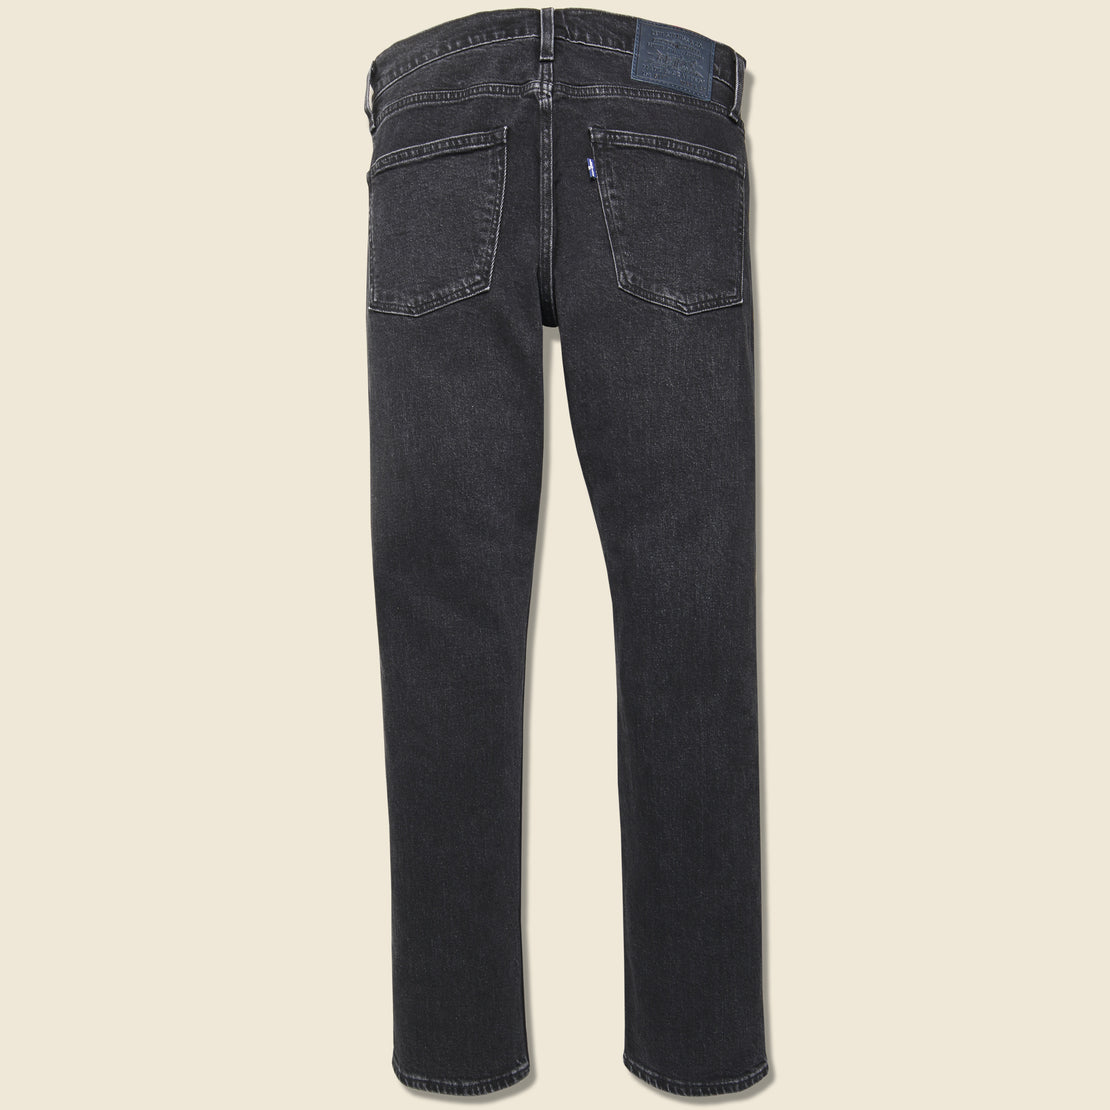 511 Slim Fit Jean - Blackbill - Levis Made & Crafted - STAG Provisions - Pants - Denim